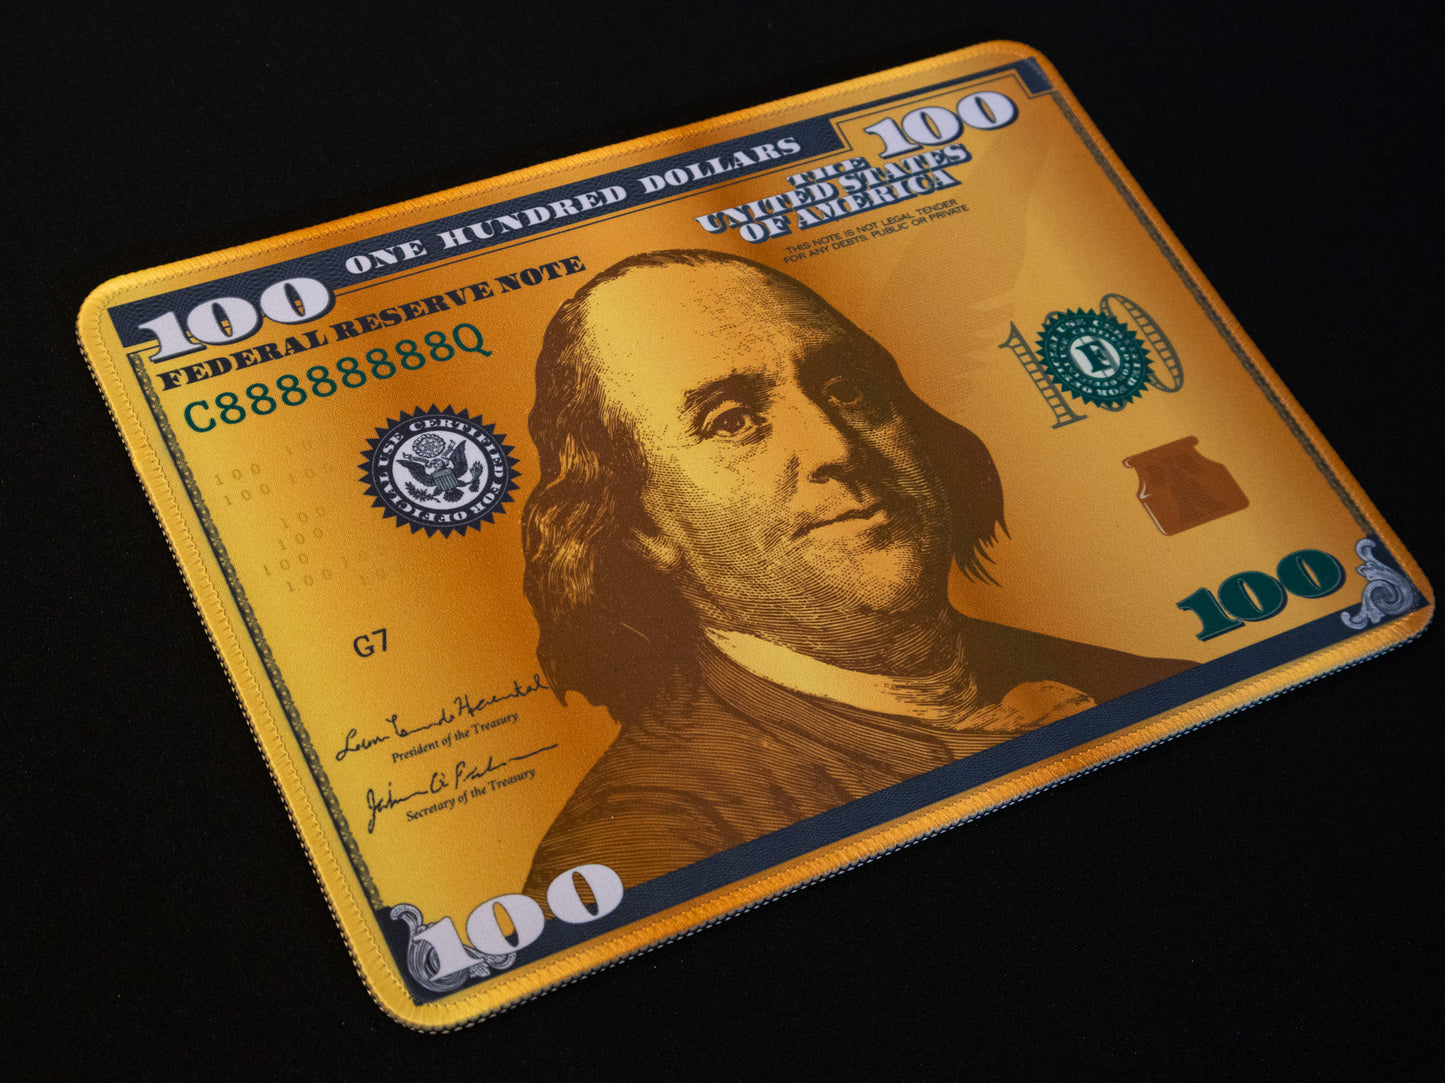 Gold $100 Bill Mouse Pad 11" x 8 "